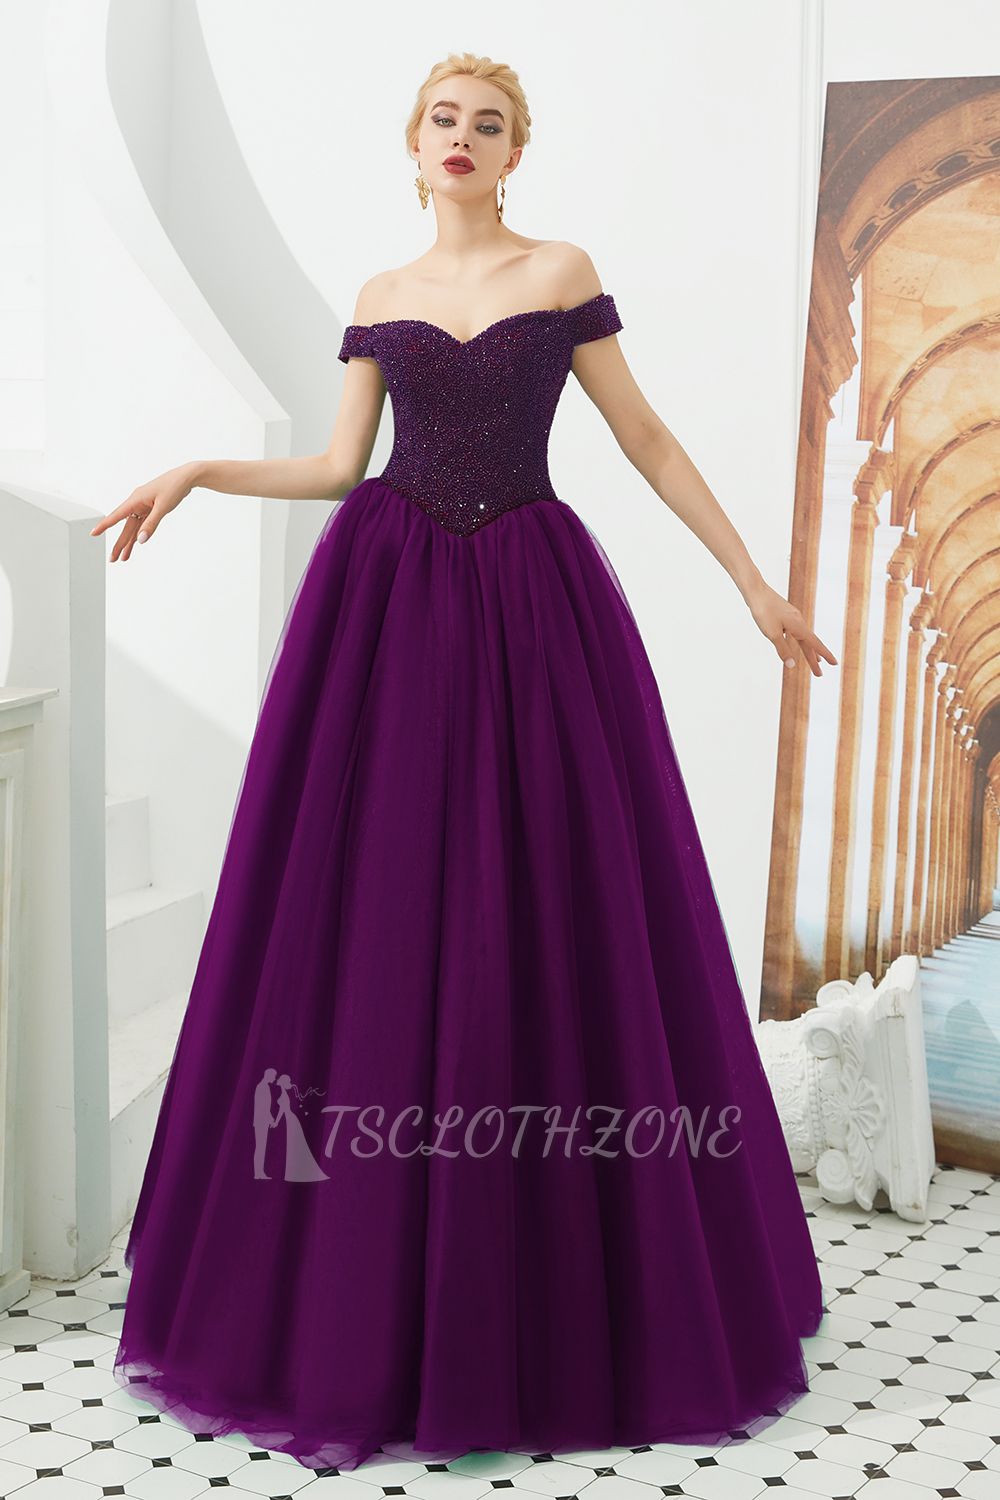 Harry | Elegant Emerald green Off-the-shoulder Ball Gown Dress for Prom/Evening